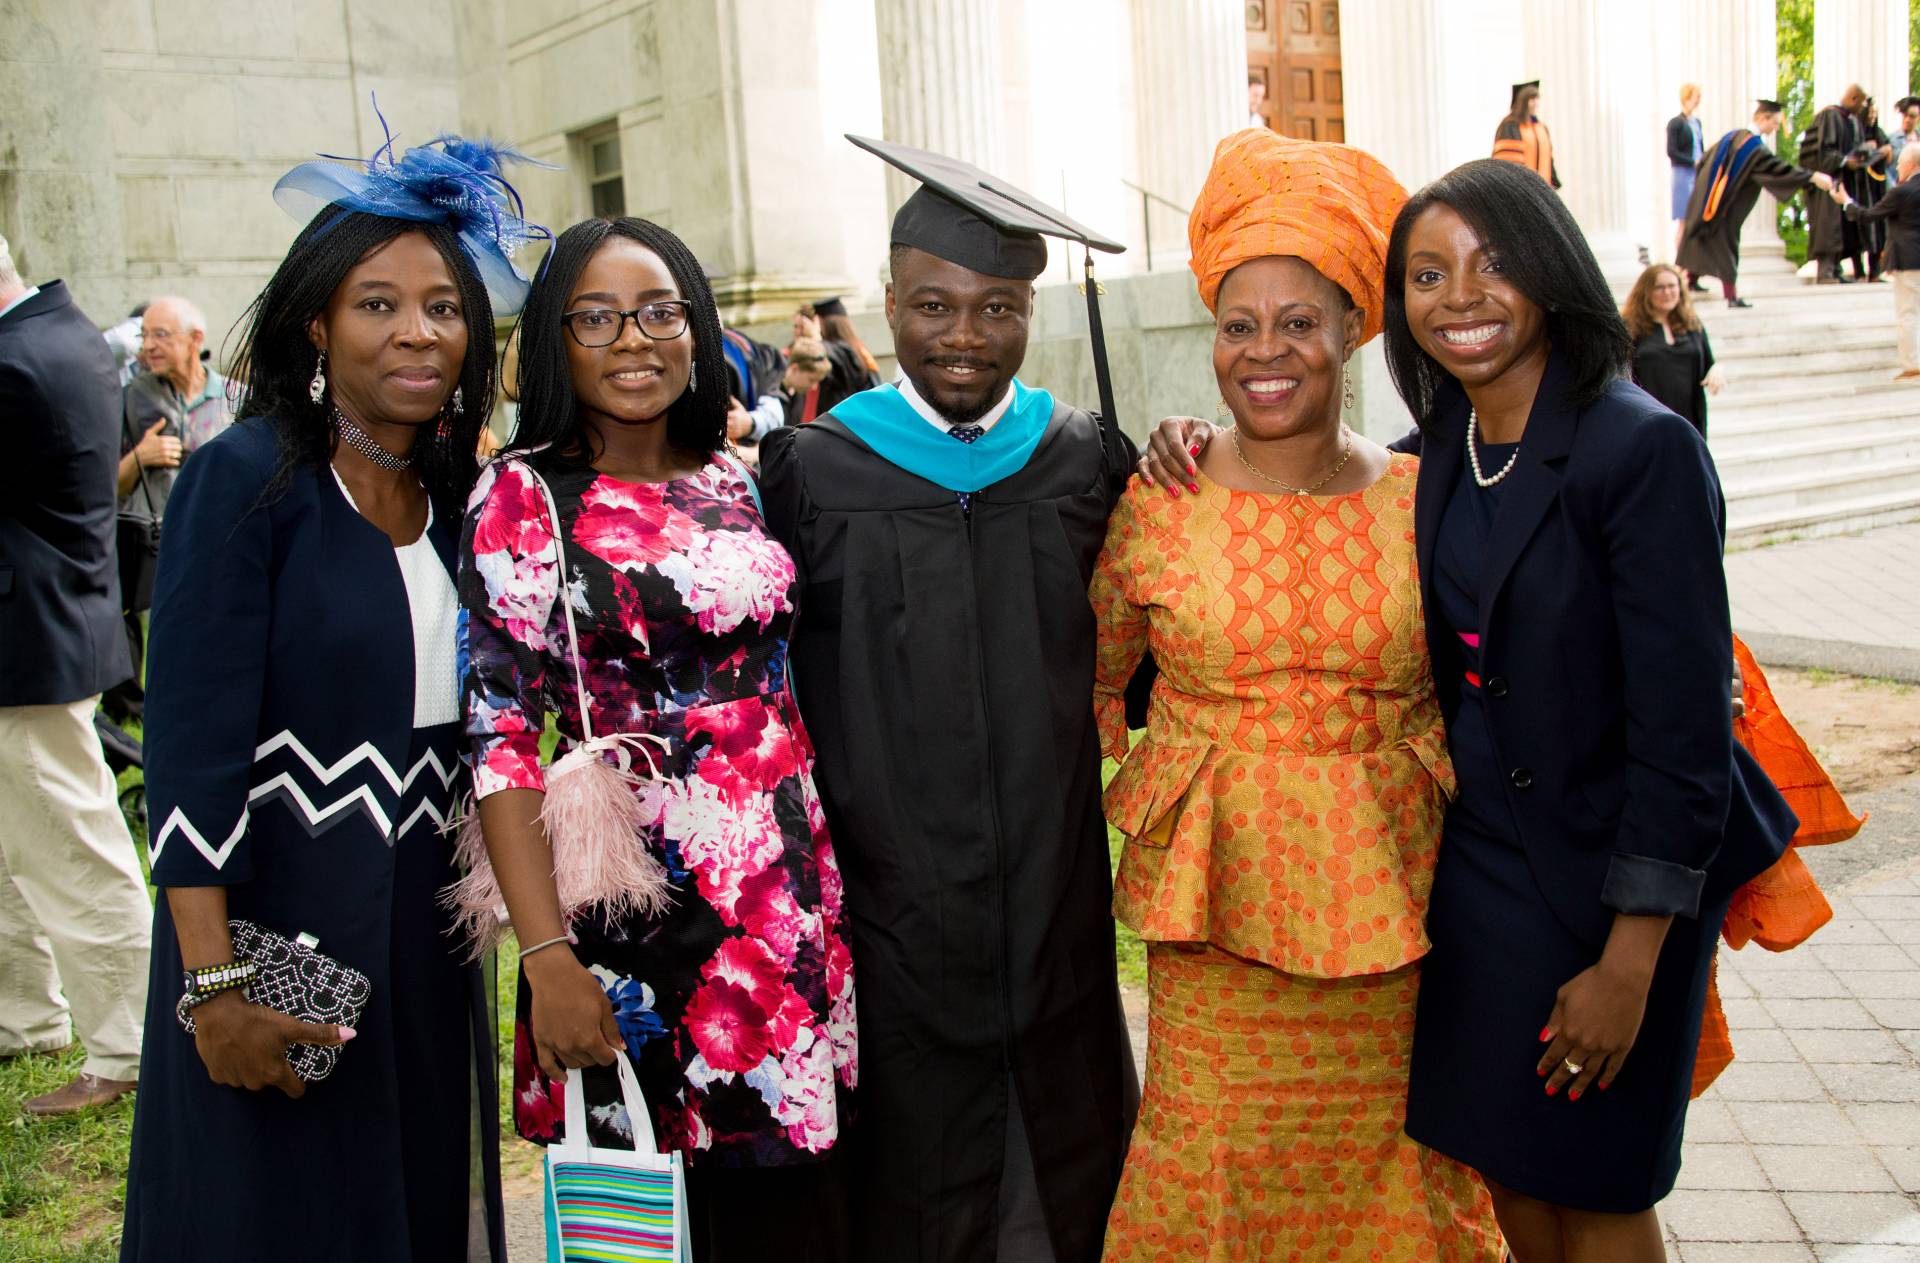 James Oladipupo Williams with his family after hooding ceremony